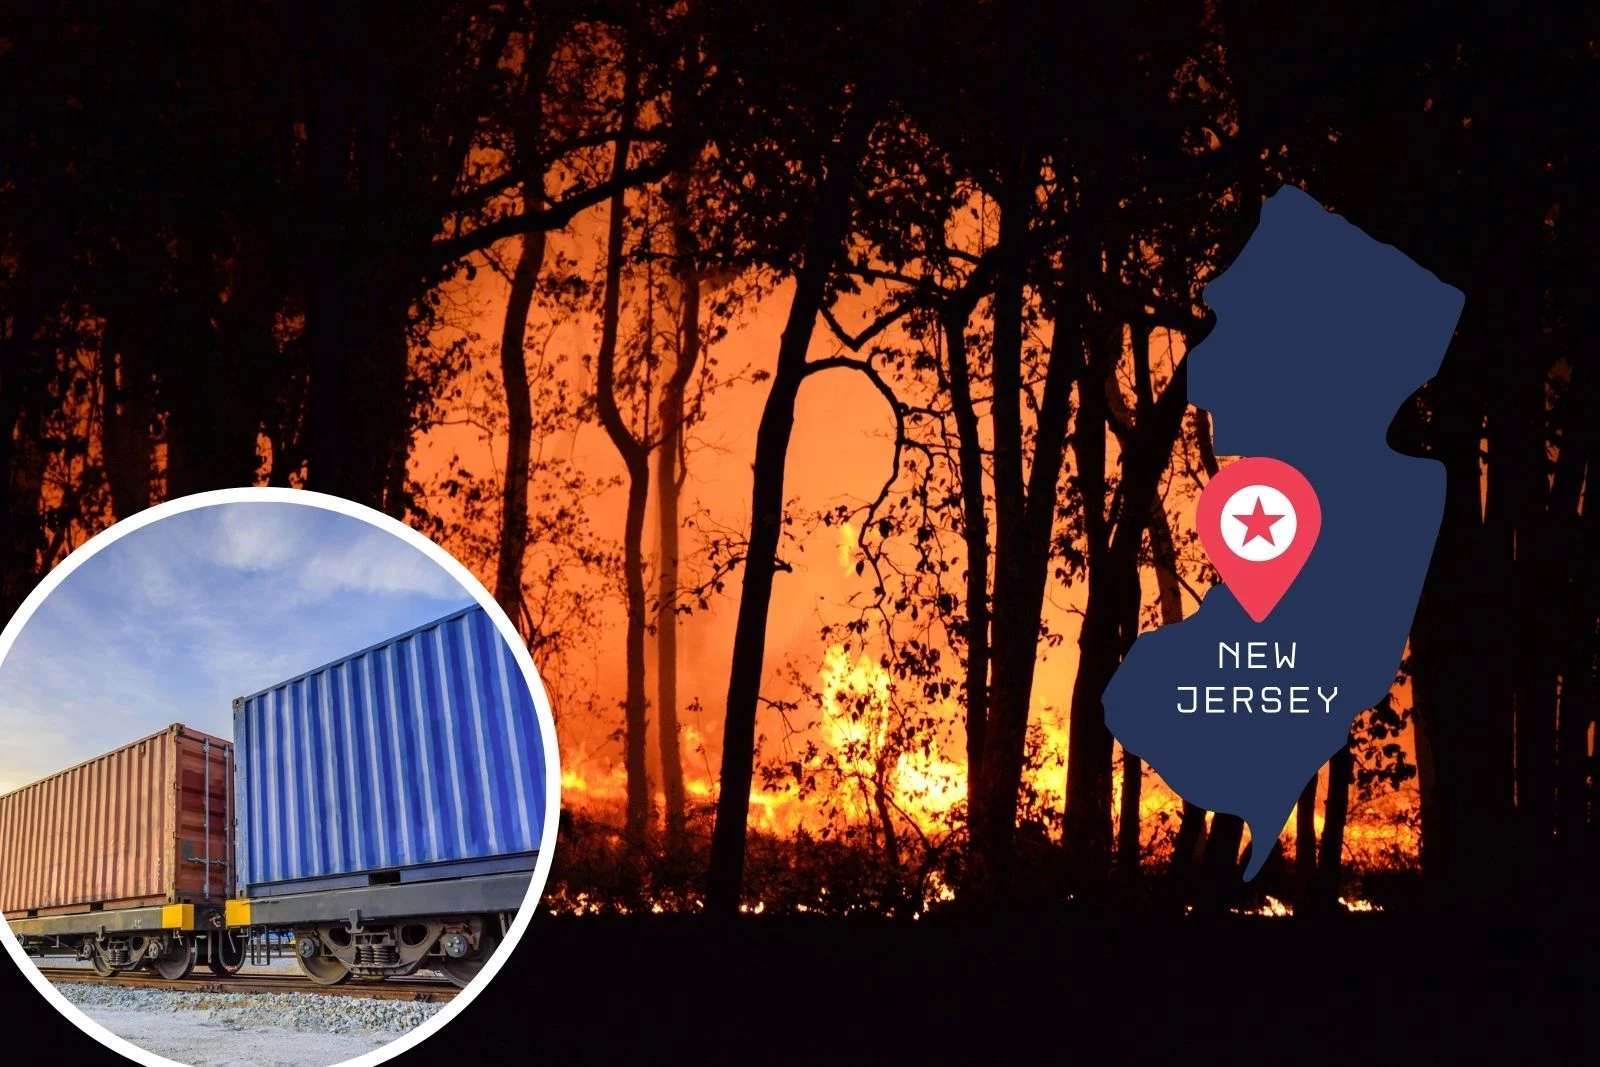 Winslow NJ Wildfire Caused by Train Spark